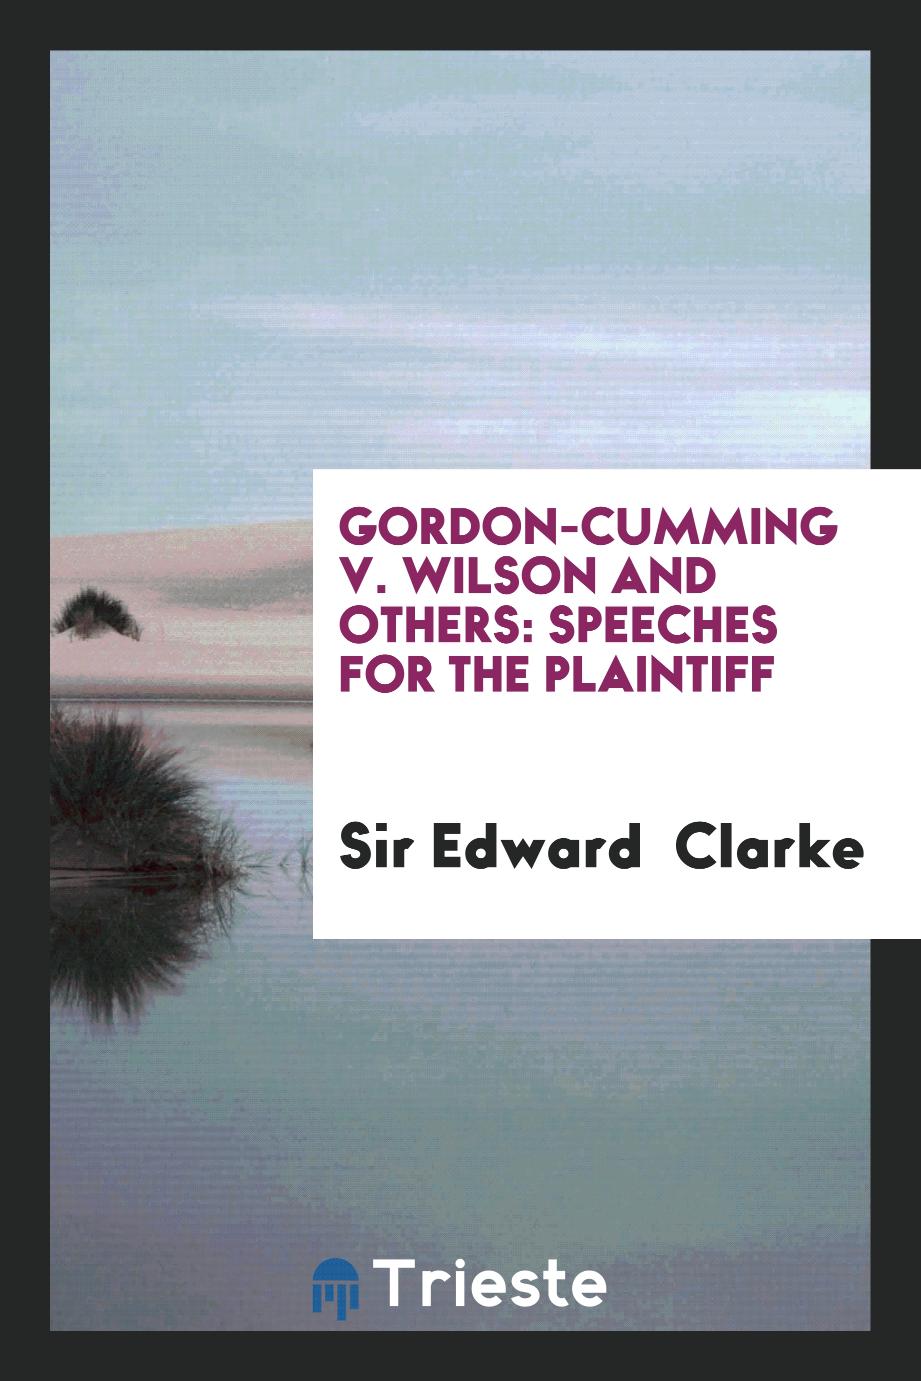 Gordon-Cumming V. Wilson and Others: Speeches for the Plaintiff